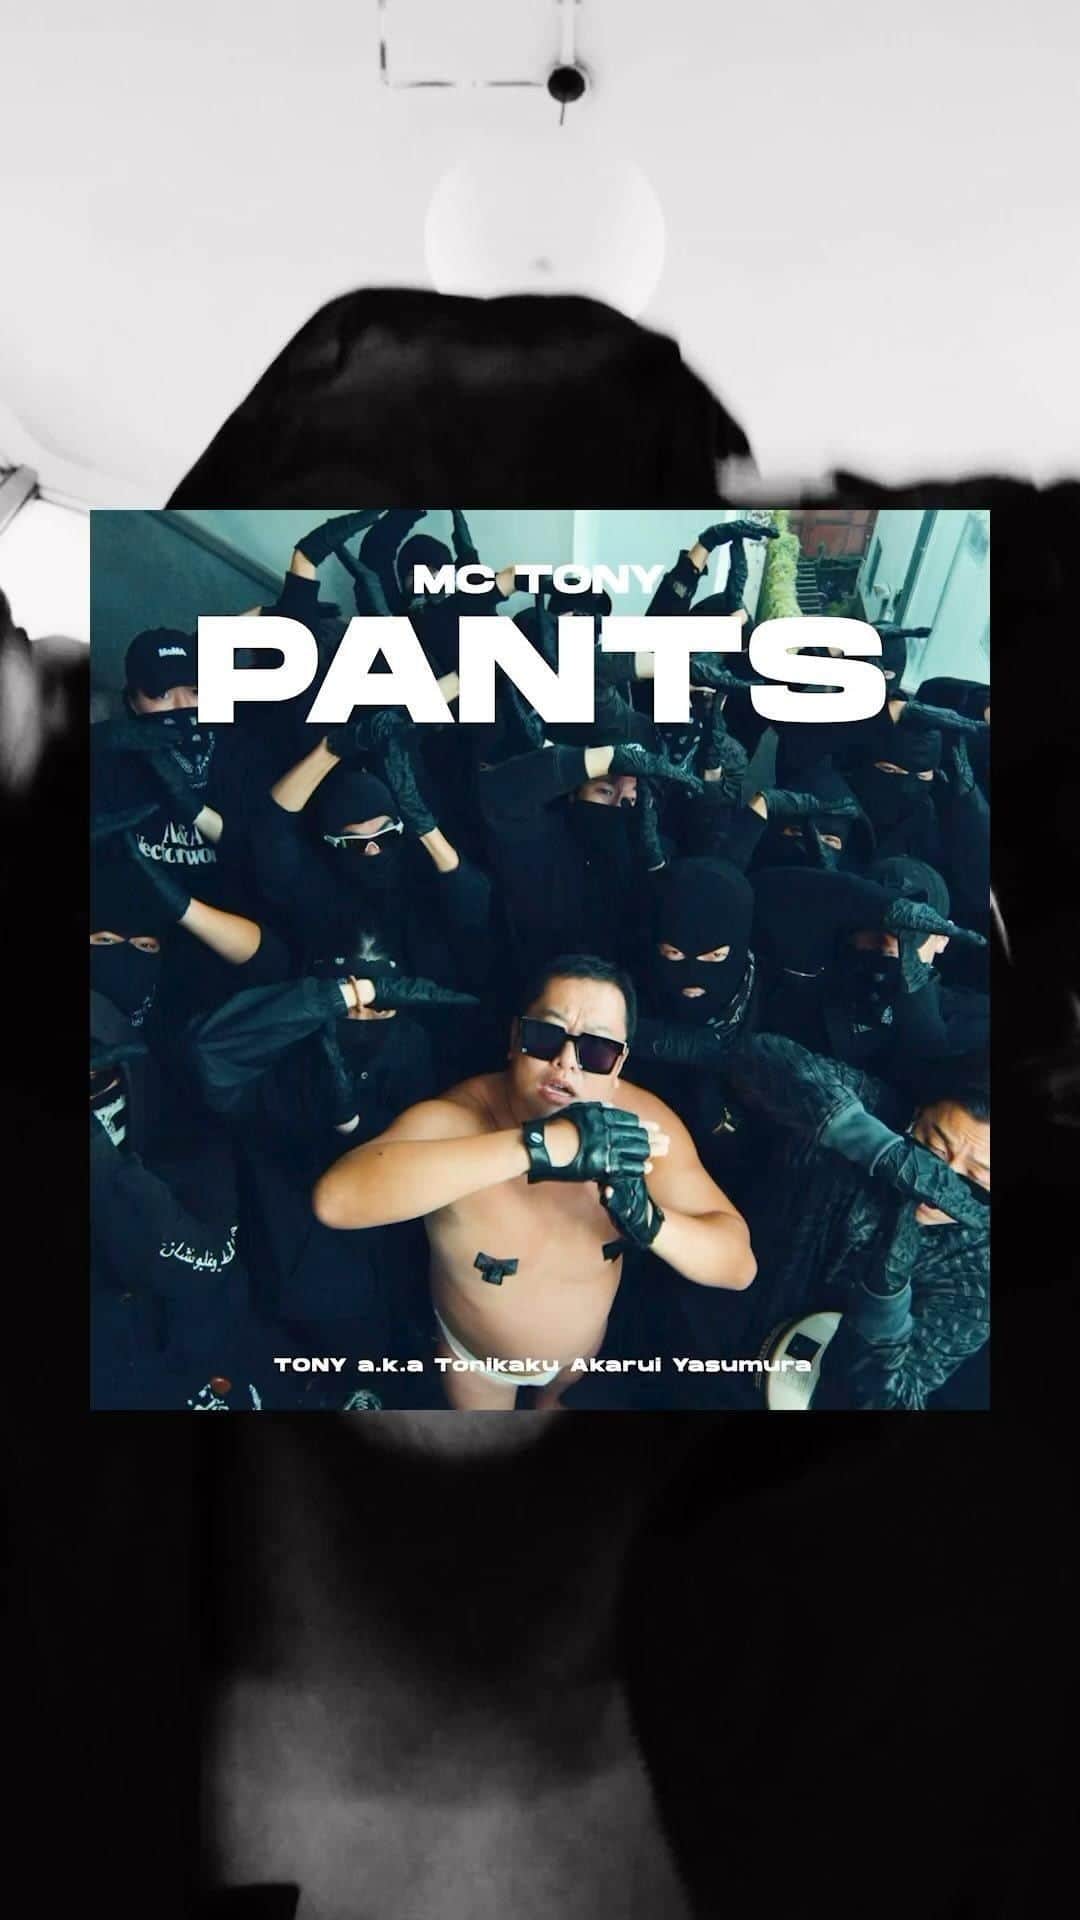 とにかく明るい安村のインスタグラム：「I am wearing pants, but I can pose naked. MC TONY a.k.a TONIKAKU releases his first digital single "PANTS" . The track was produced by Double Clapperz, a Japanese group that was fast to focus on UK drill and grime music, and gained fame in recent years for their work on tracks for Ralph and other musicians. MC TONY, uses his nearly naked body and lyrics flowing over UK drill music, to highlight the value of being peaceful, unarmed, and simply being yourself within the ominous atmosphere triggered by gunshots and balaclavas originating in South London.In June, MC TONY, a.k.a. Tonikaku qualified for the British audition show "Britain's Got Talent”, becoming the first Japanese finalist. He continued expanding worldwide after he was welcomed to the French lineup of the show in October. His peaceful poetry yet strong flow over brutal sounds, which he can only furnish, are in the spotlight.  「MC TONY」が初の1st Digital single「PANTS」をリリース。日本でUKドリルやグライムに一早く着目し、近年ralphや様々なアーティストの楽曲を手掛け注目を集める「Double Clapperz」が楽曲プロデュースを担当。サウスロンドンから広まった目出し帽や銃声など危険なオーラをまとうUKドリル的サウンドに乗せ、MC TONYが非暴力・非武装・ありのままの姿であることの大切さを全身とバースで表現している。6月にはイギリスのオーディション番組「Britain’s Got Talent」にて日本人初のファイナリストに、10月にはフランス版の番組でも合格を勝ち取るなど世界を股にかけ活動するとにかく明るい安村ことMC TONY。彼だからこそ発信できる、暴力的サウンドに乗った平和なリリックと力強いフローに注目。  Music Producer: Double Clapperz Creative Direction: HYTEK INC. MV Direction / Production: BUDDHA INC.  🎥Music Video https://youtu.be/58uSuykluUE  🎧Streaming / Download  https://linkco.re/ZP4v9yse  #mctony #pants #tonikaku #yasumuradrill #ukdrill #安村ドリル」